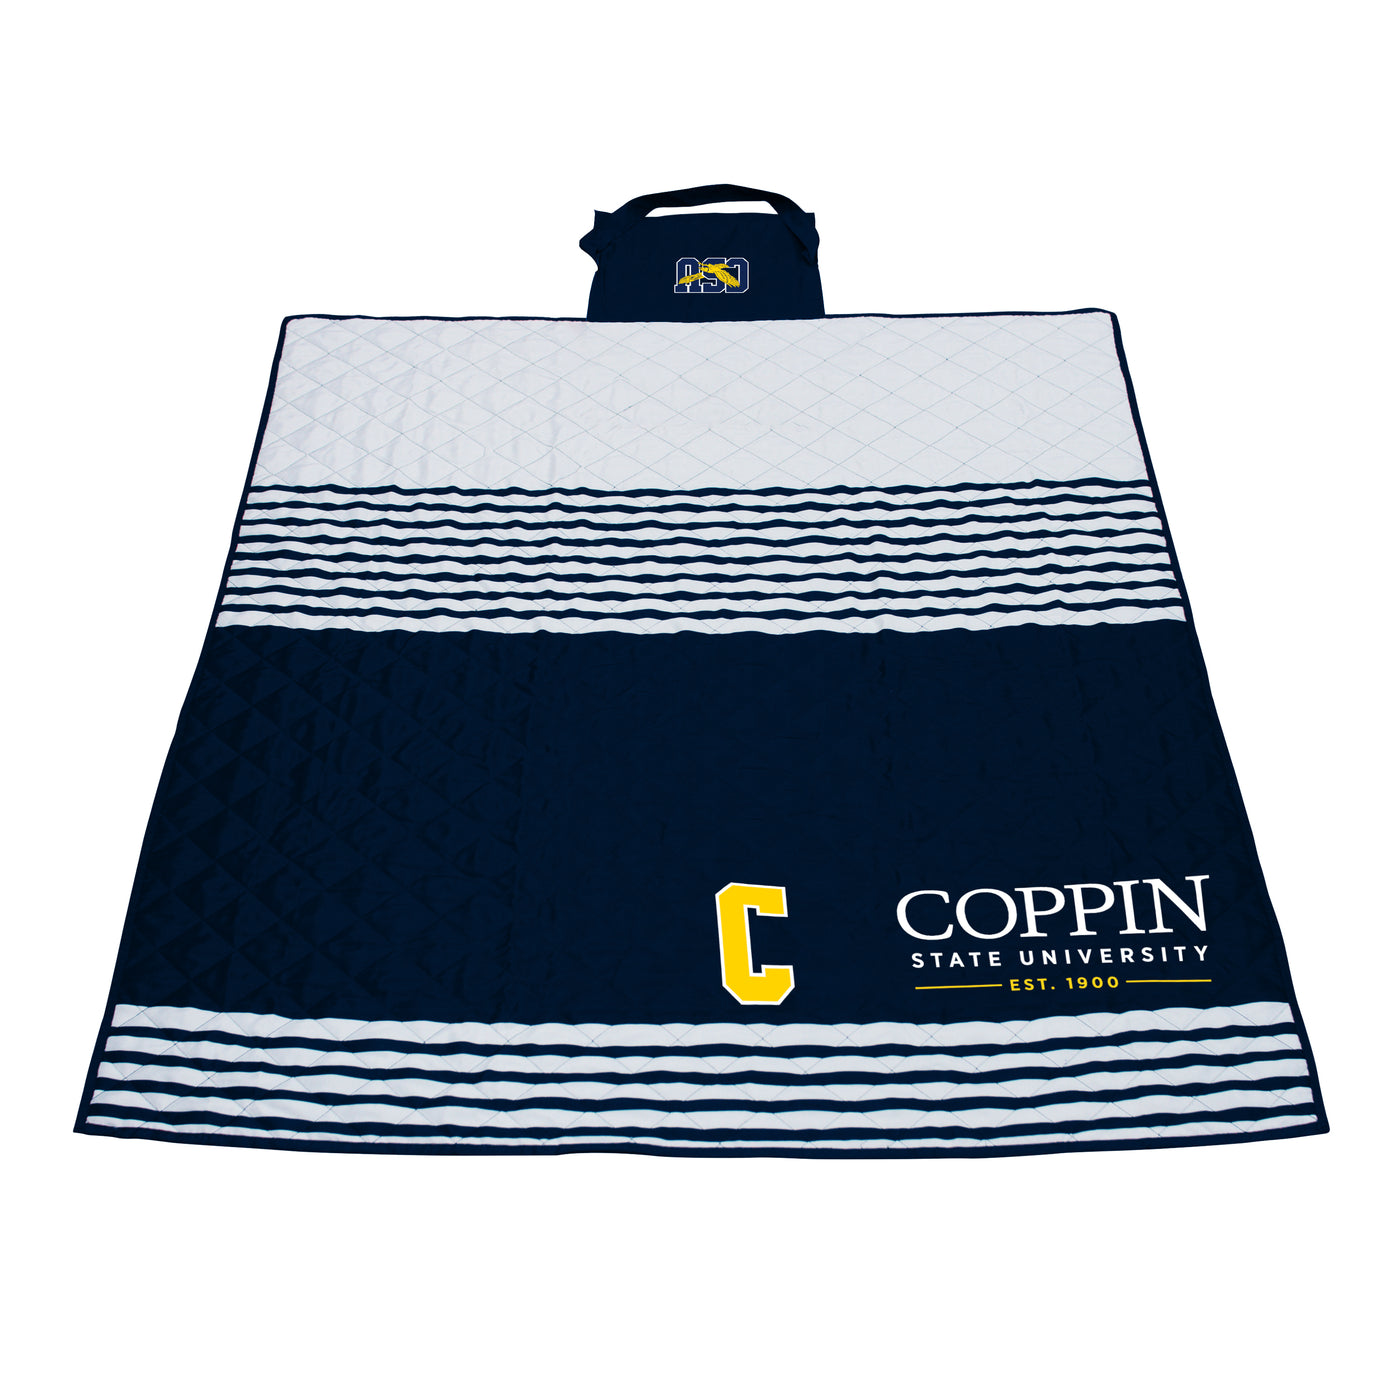 Coppin State Outdoor Blanket